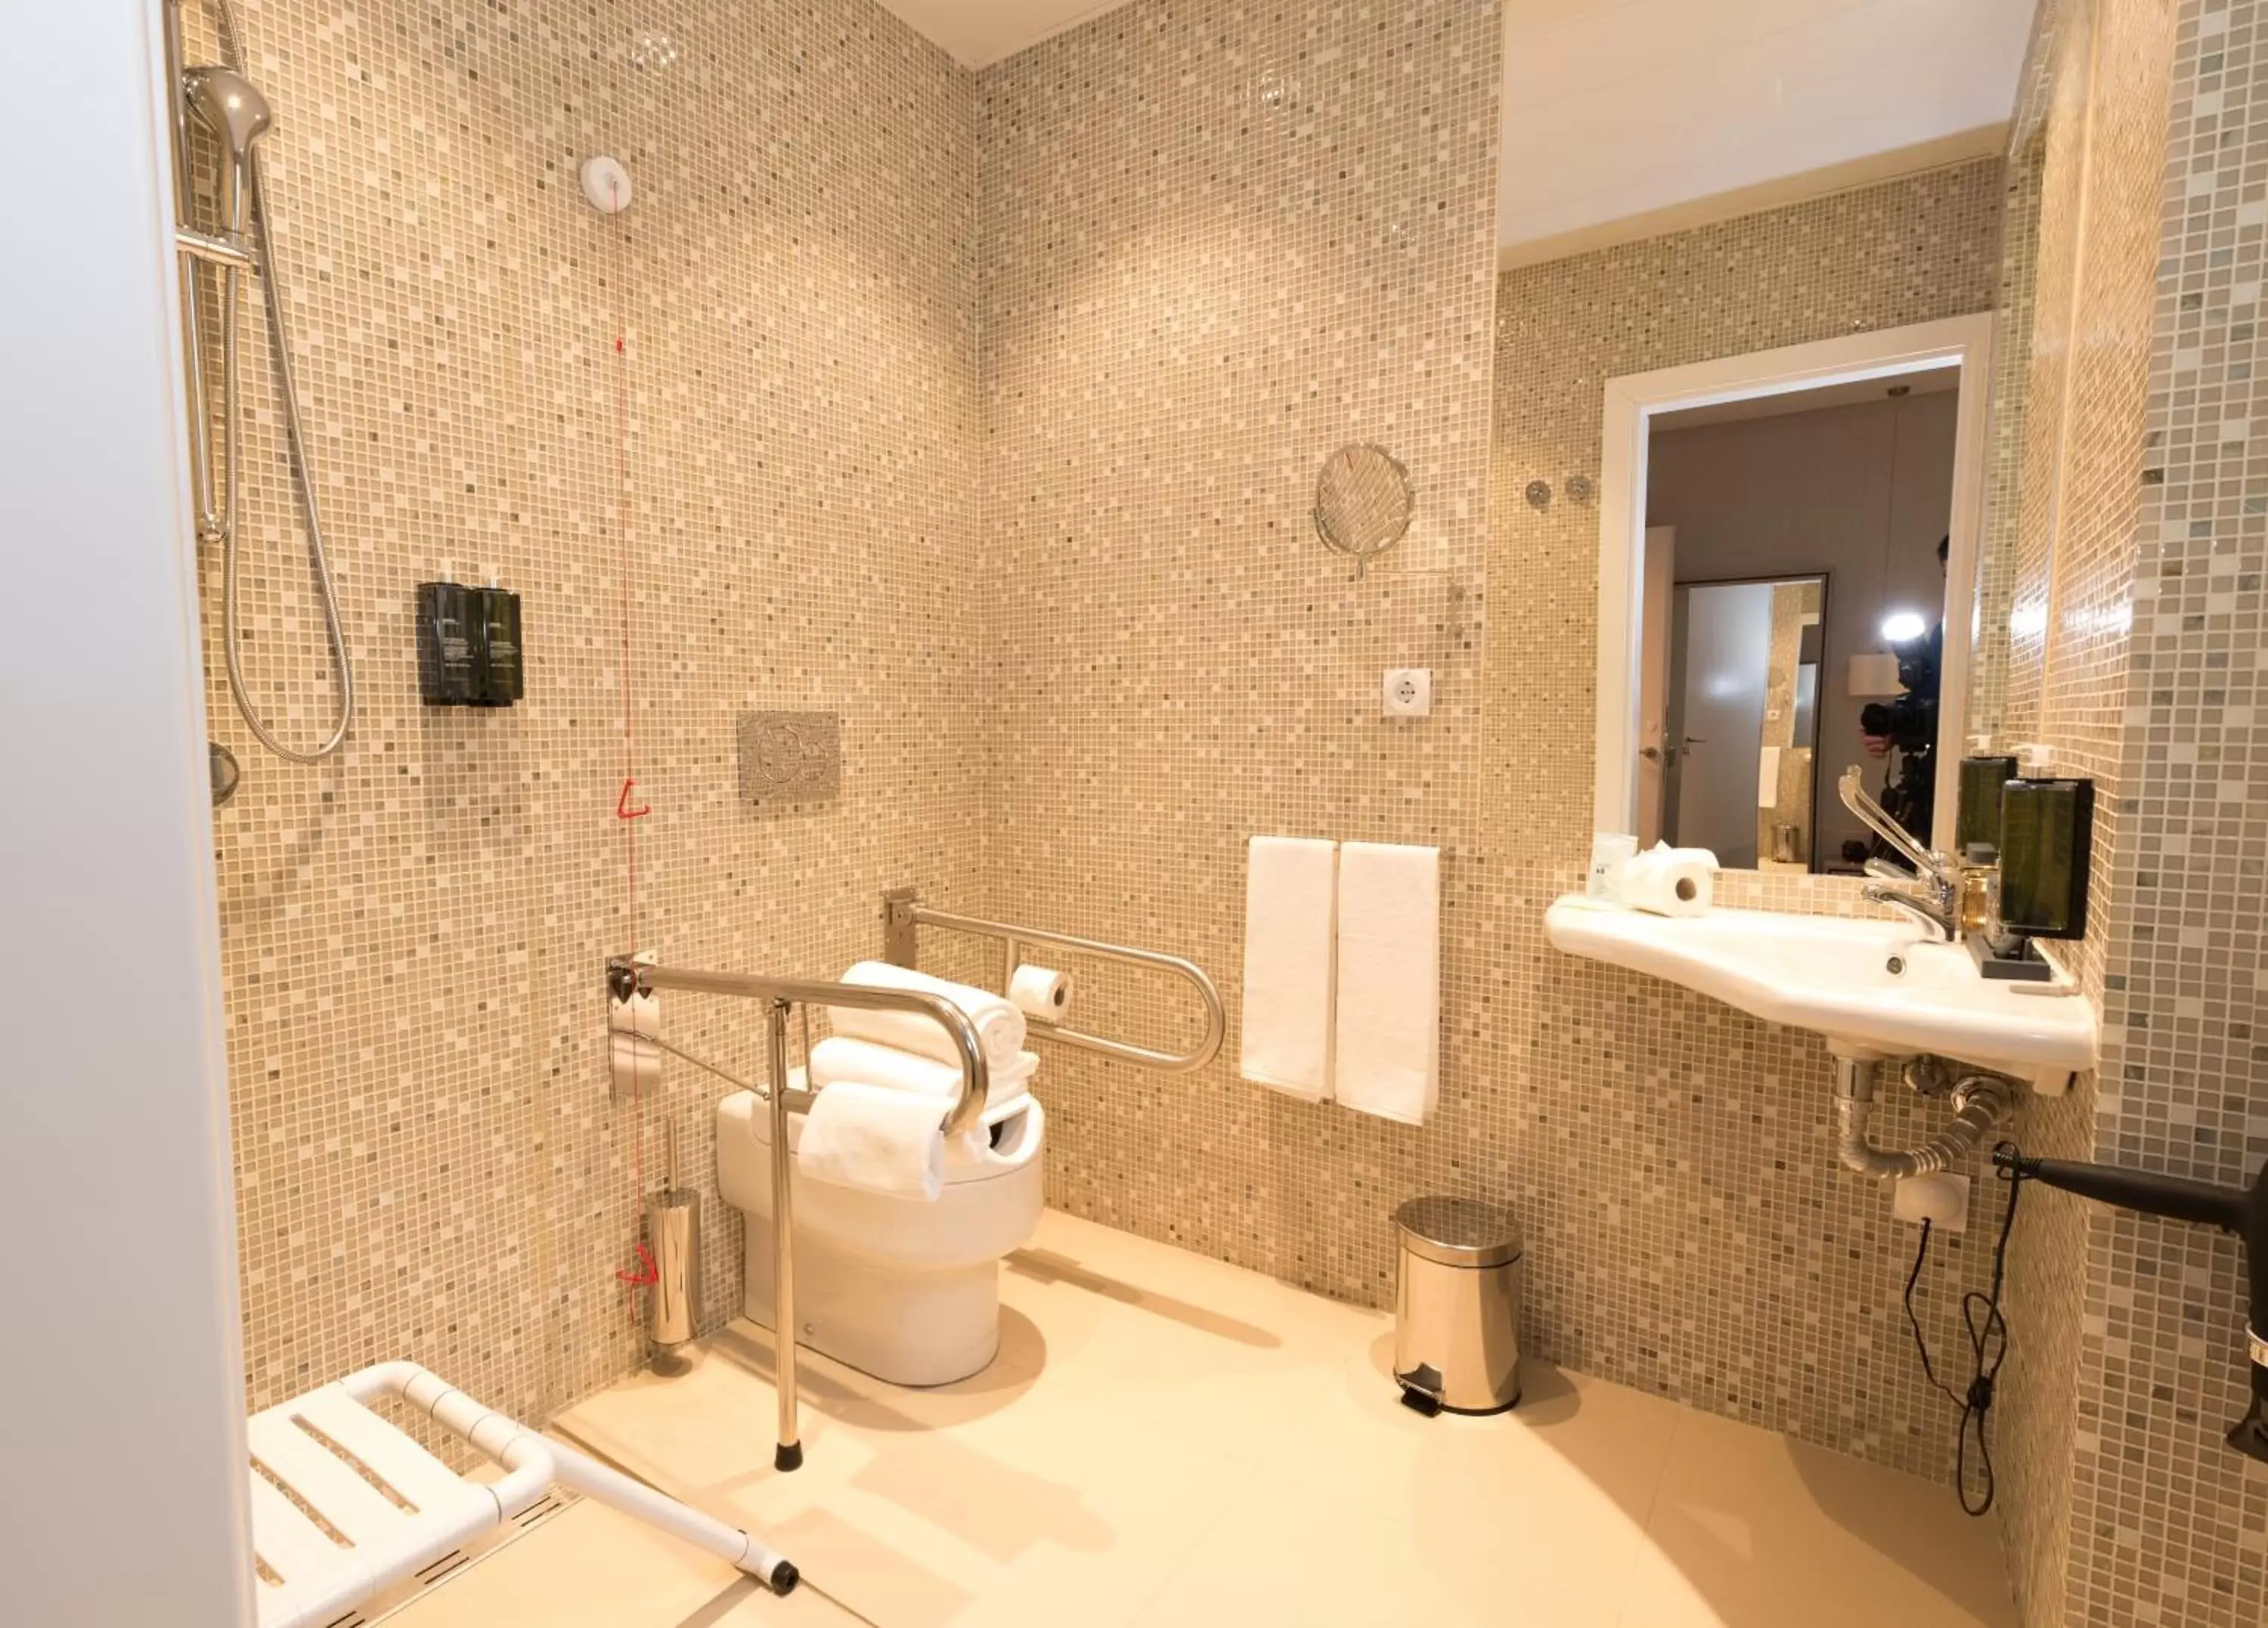 Facility for disabled guests, Bathroom in The Leaf Boutique Hotel Lisbon